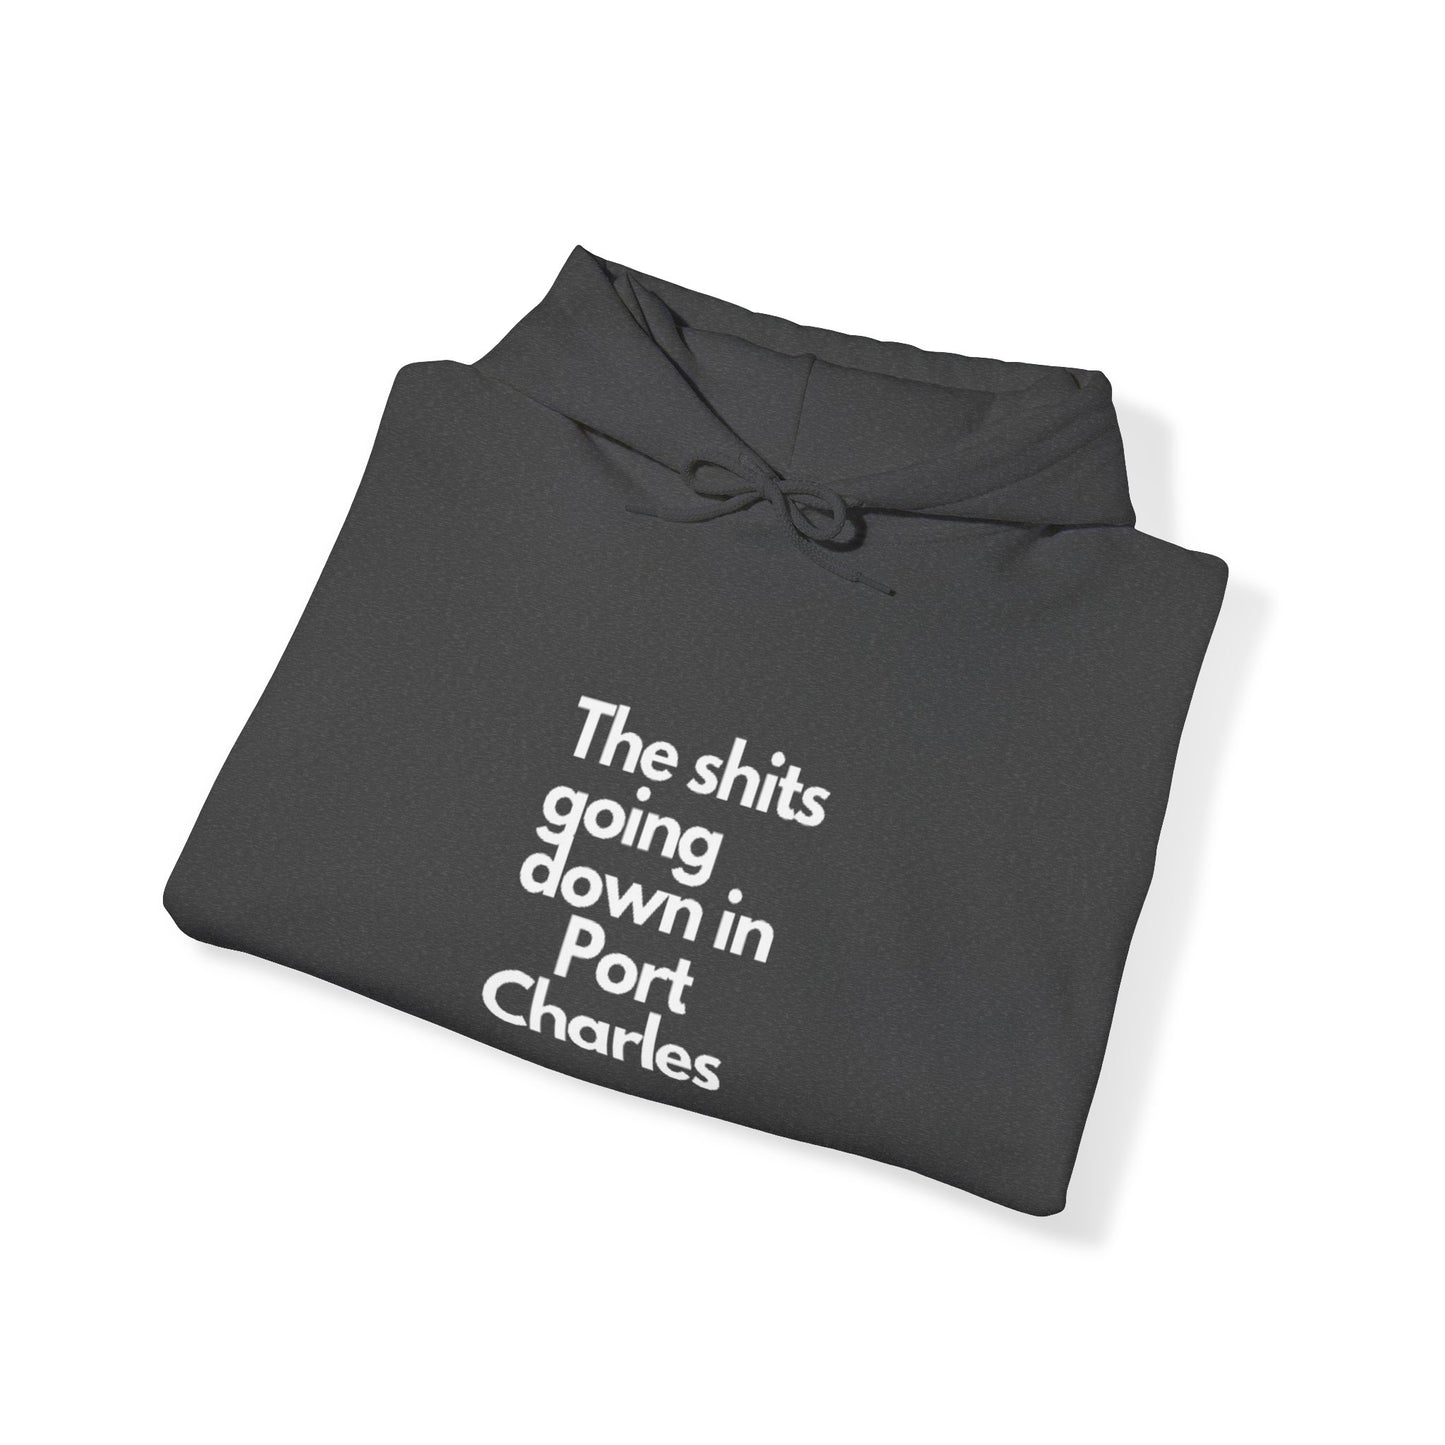 The Shit is Going Down Unisex Heavy Blend™ Hoodie